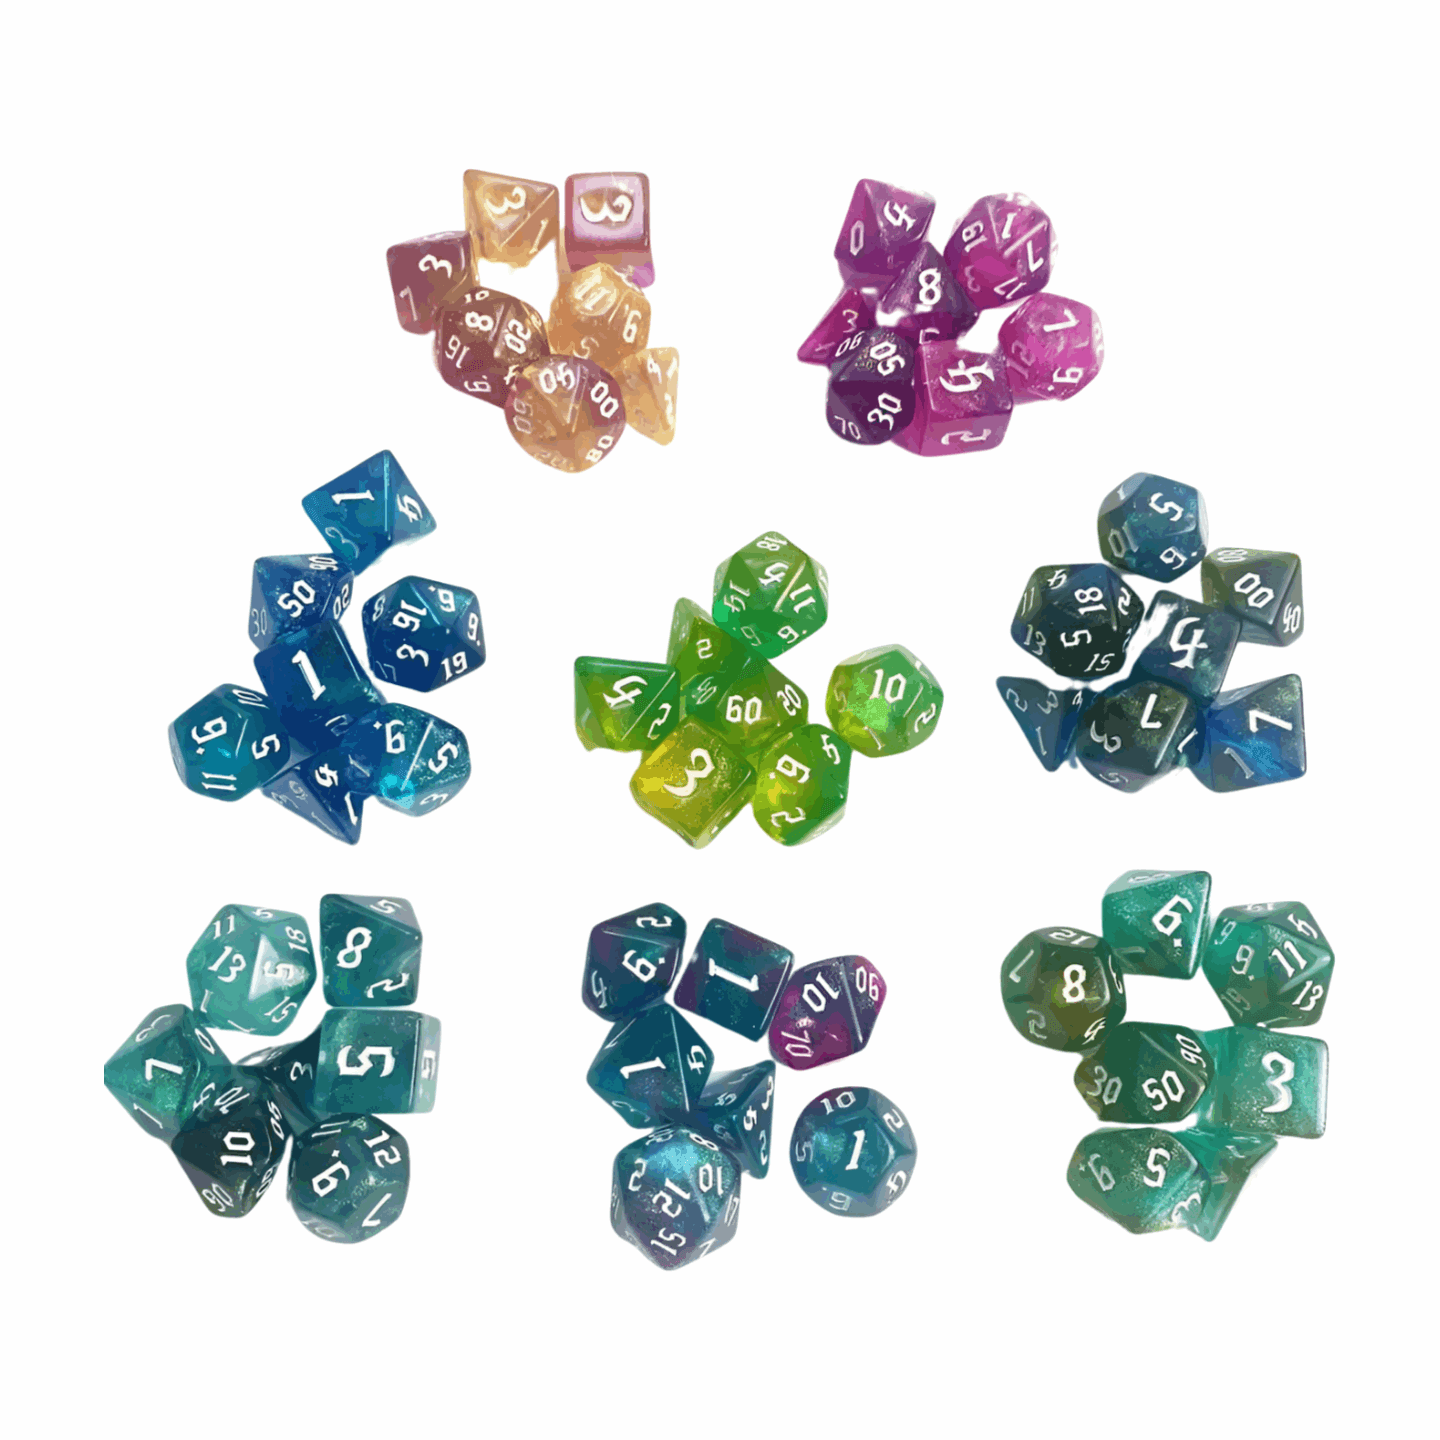 Pearl Dice 7 Piece Set - 8 colors to choose from! - Dragon Armor Games